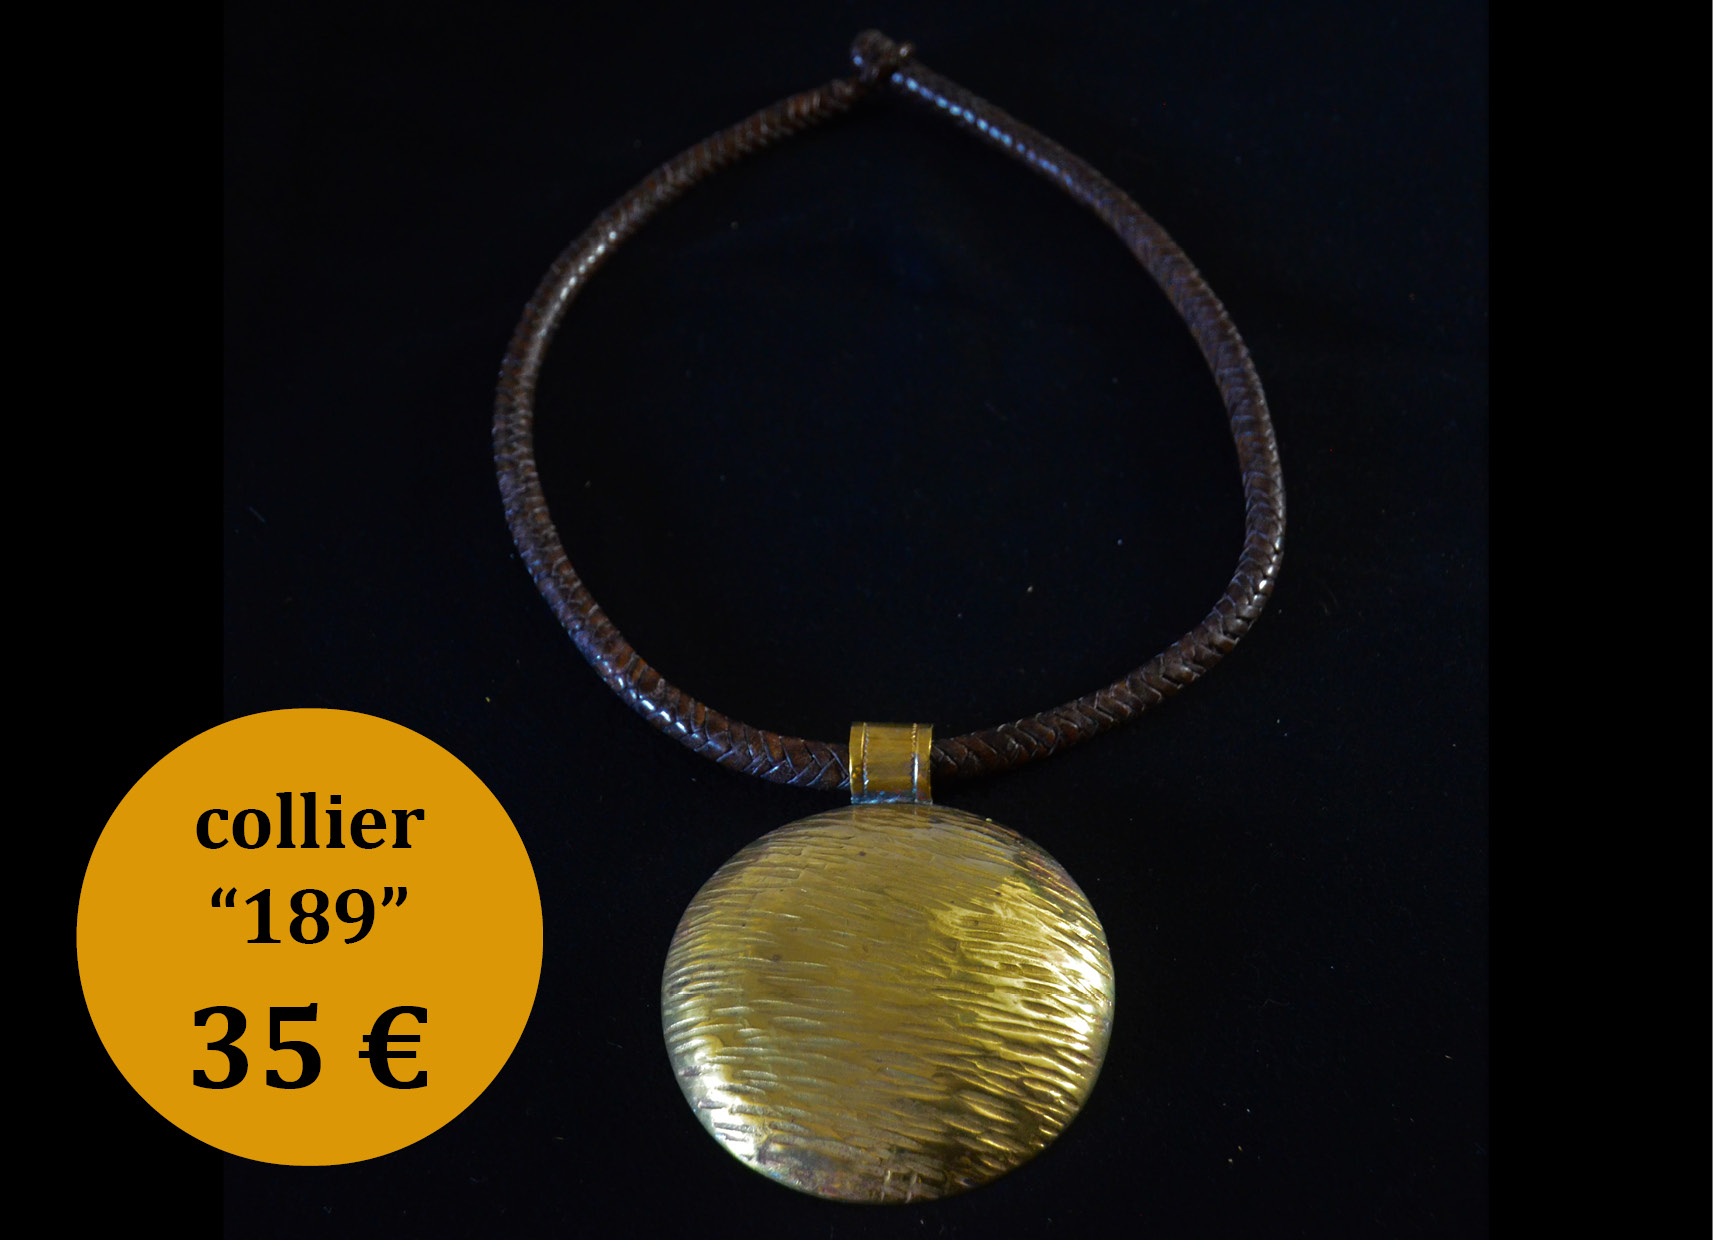 Collier "189"